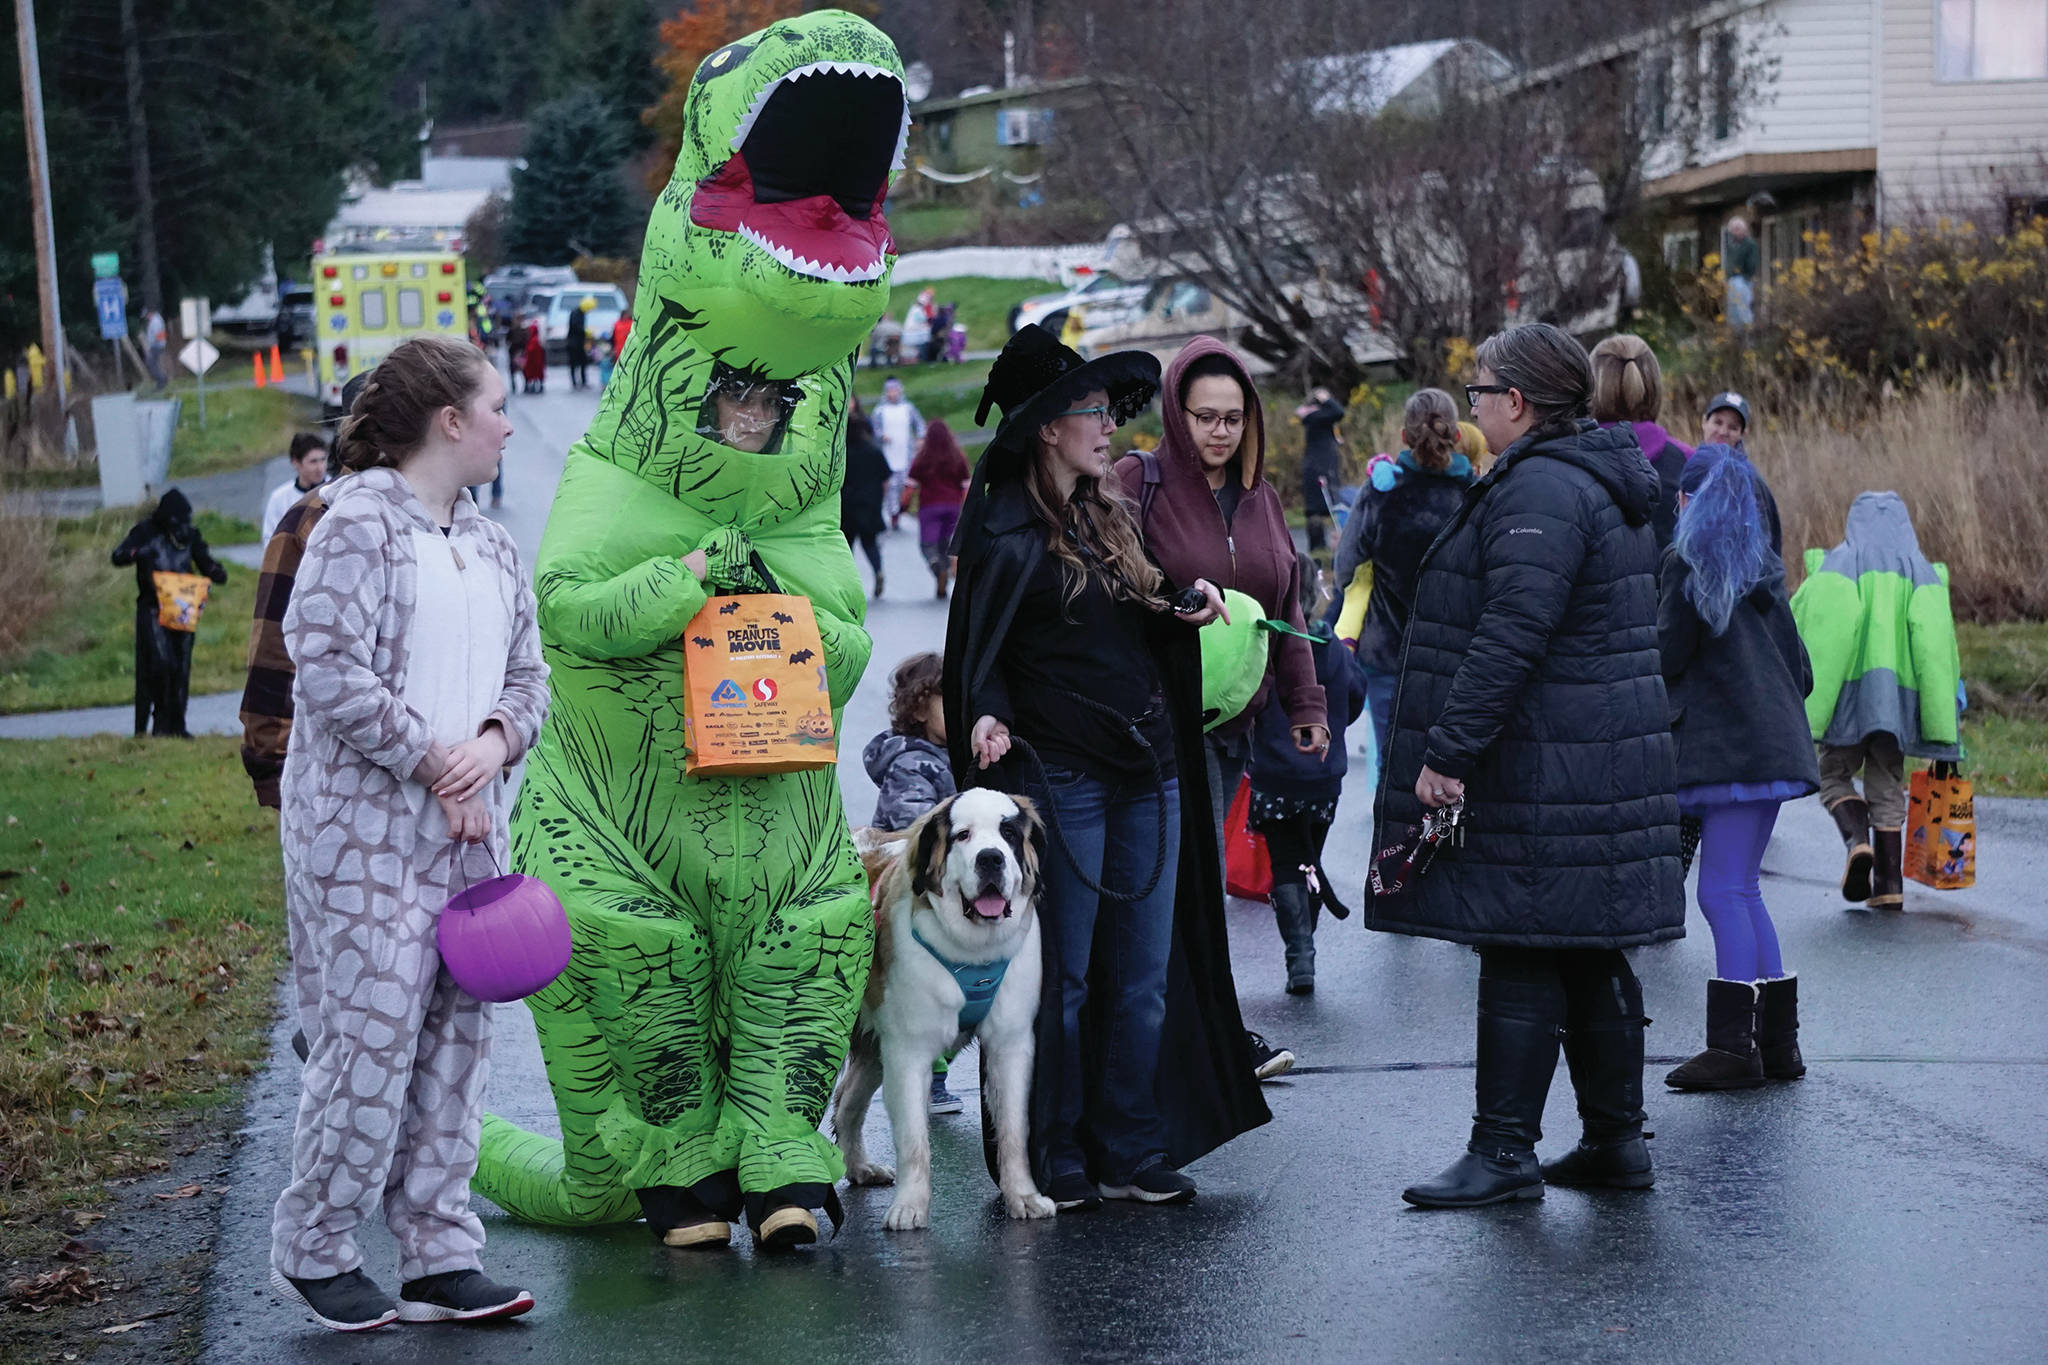 Halloween trick-or-treaters walk down Bayview Avenue, on Oct. 31, 2019, in Homer, Alaska. Bayview Avenue and Mountainview Avenue were one-way for the night to minimize traffic. (Photo by Michael Armstrong/Homer News)